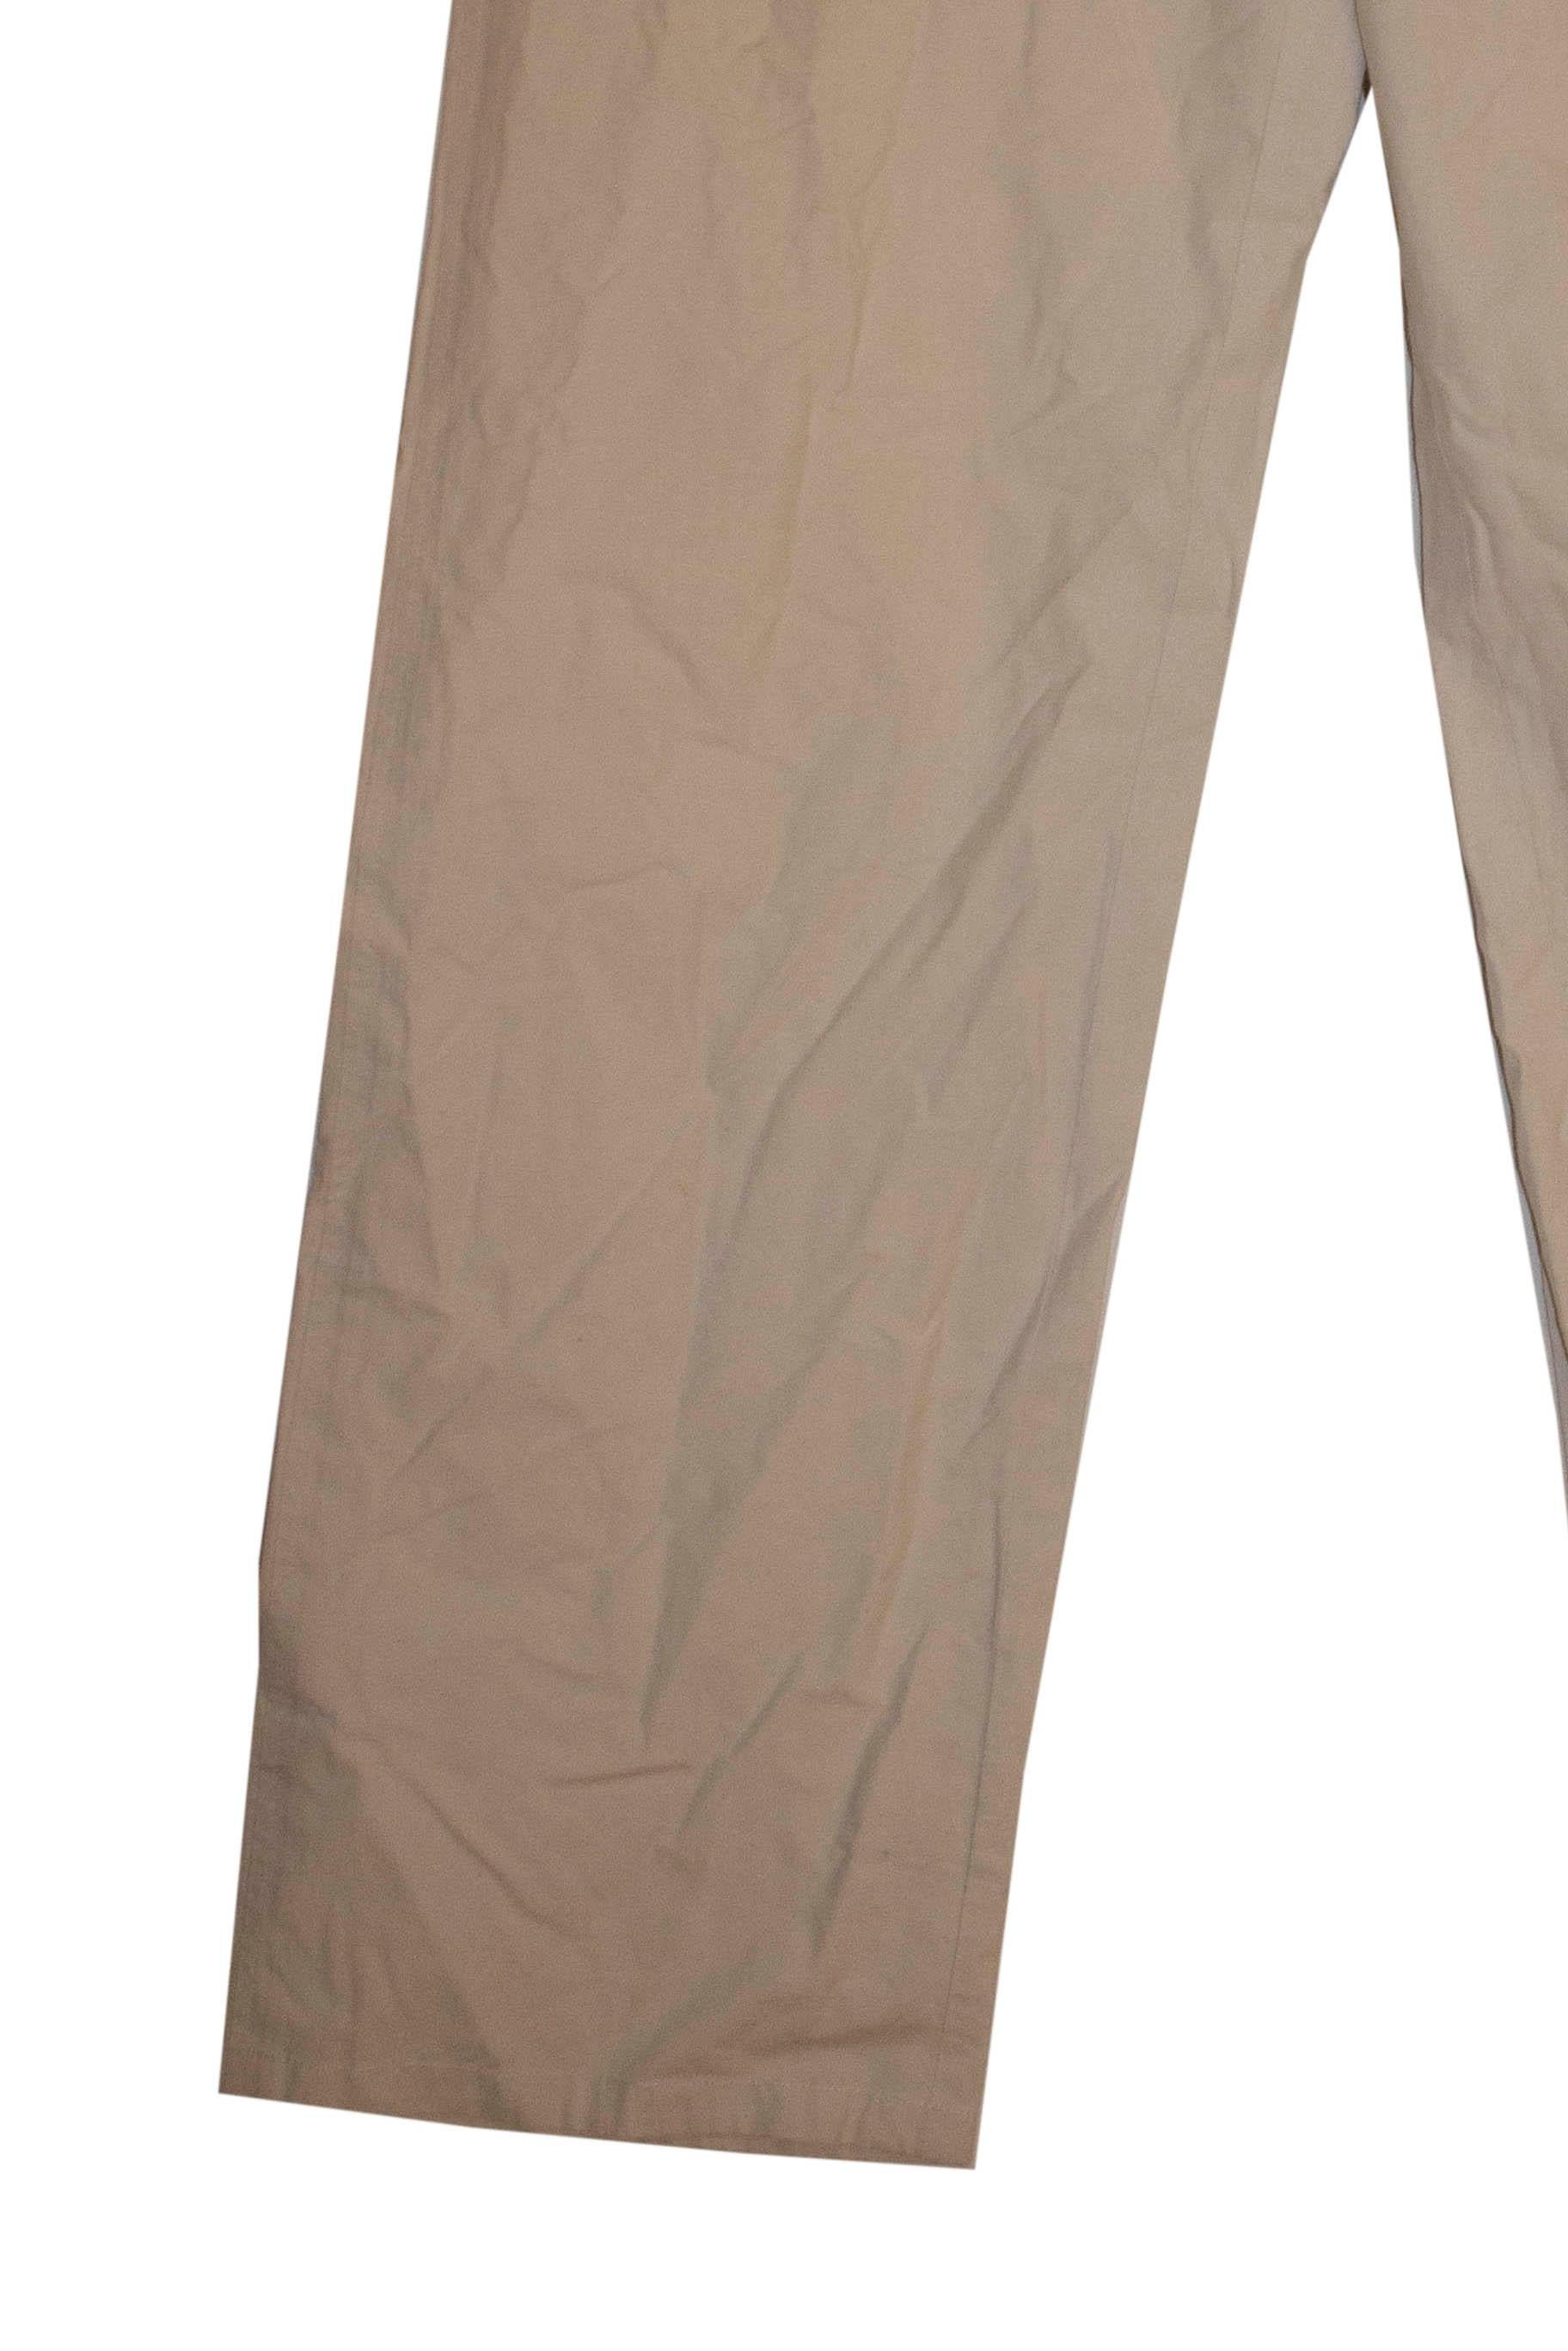 Jil Sander White Cotton Trousers In Good Condition For Sale In London, GB